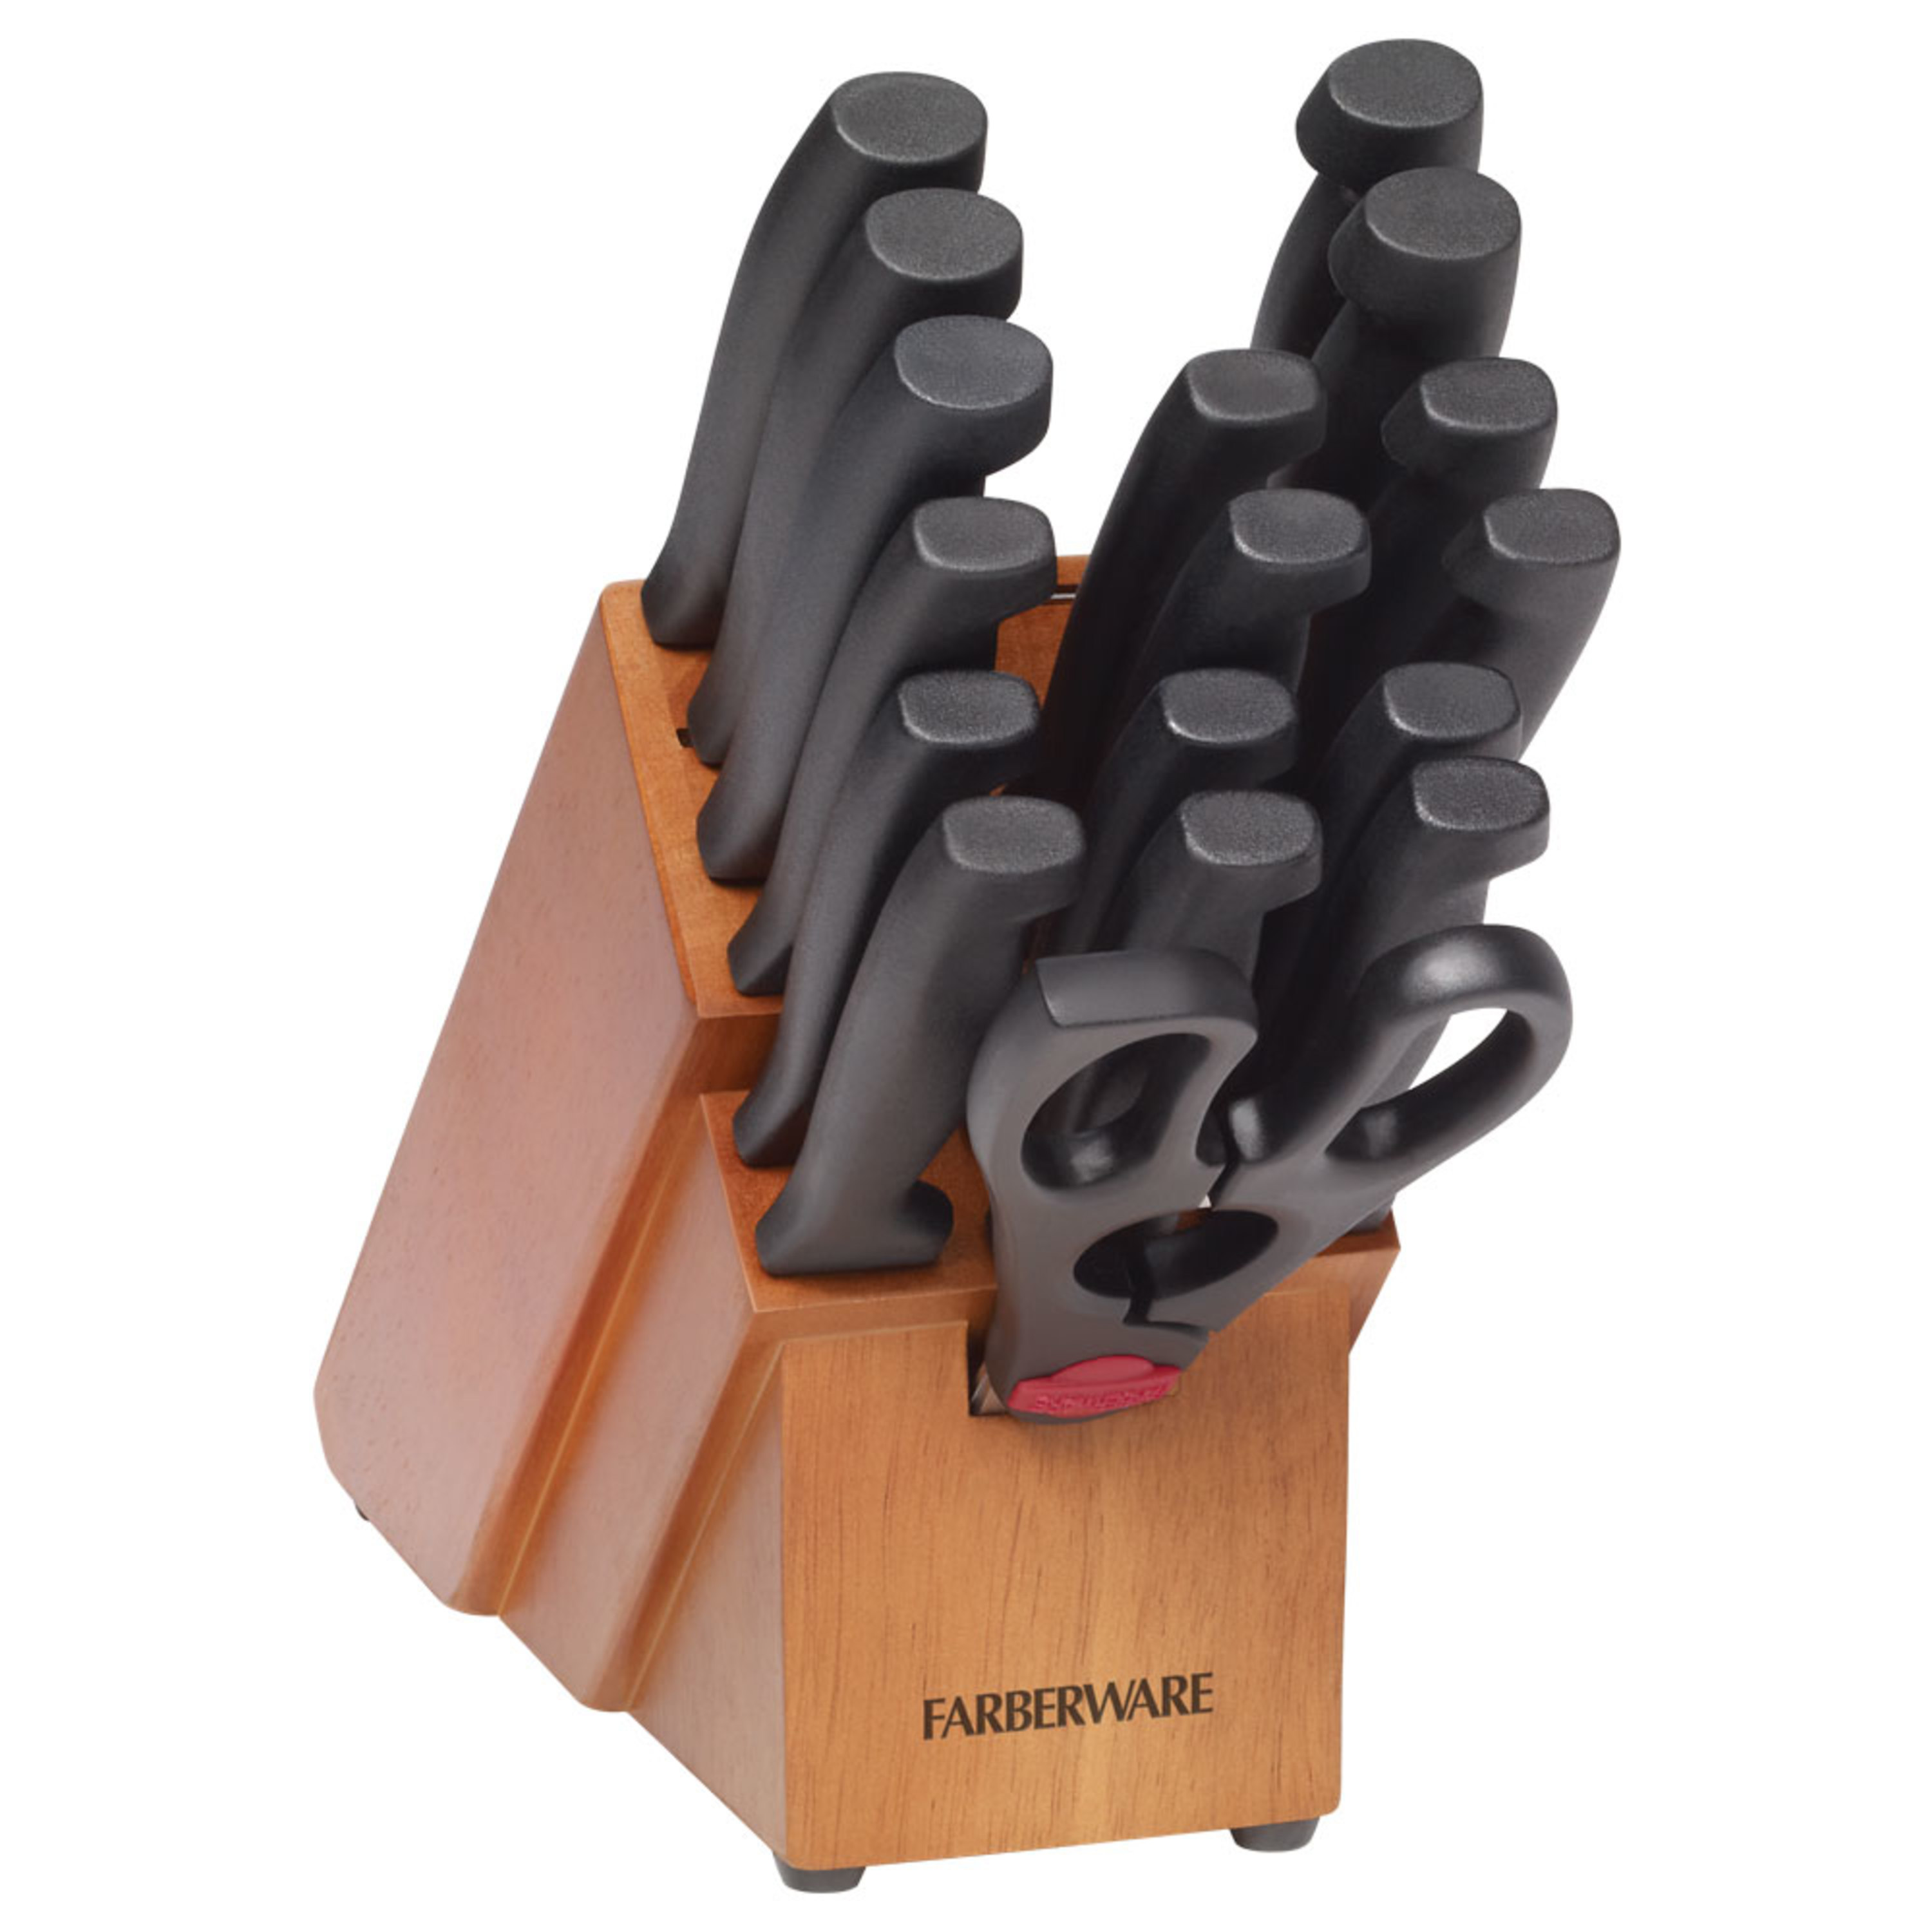 Farberware 18 Piece Never Needs Sharpening Stainless Steel Knife Set with Block Natural Wood - image 1 of 16